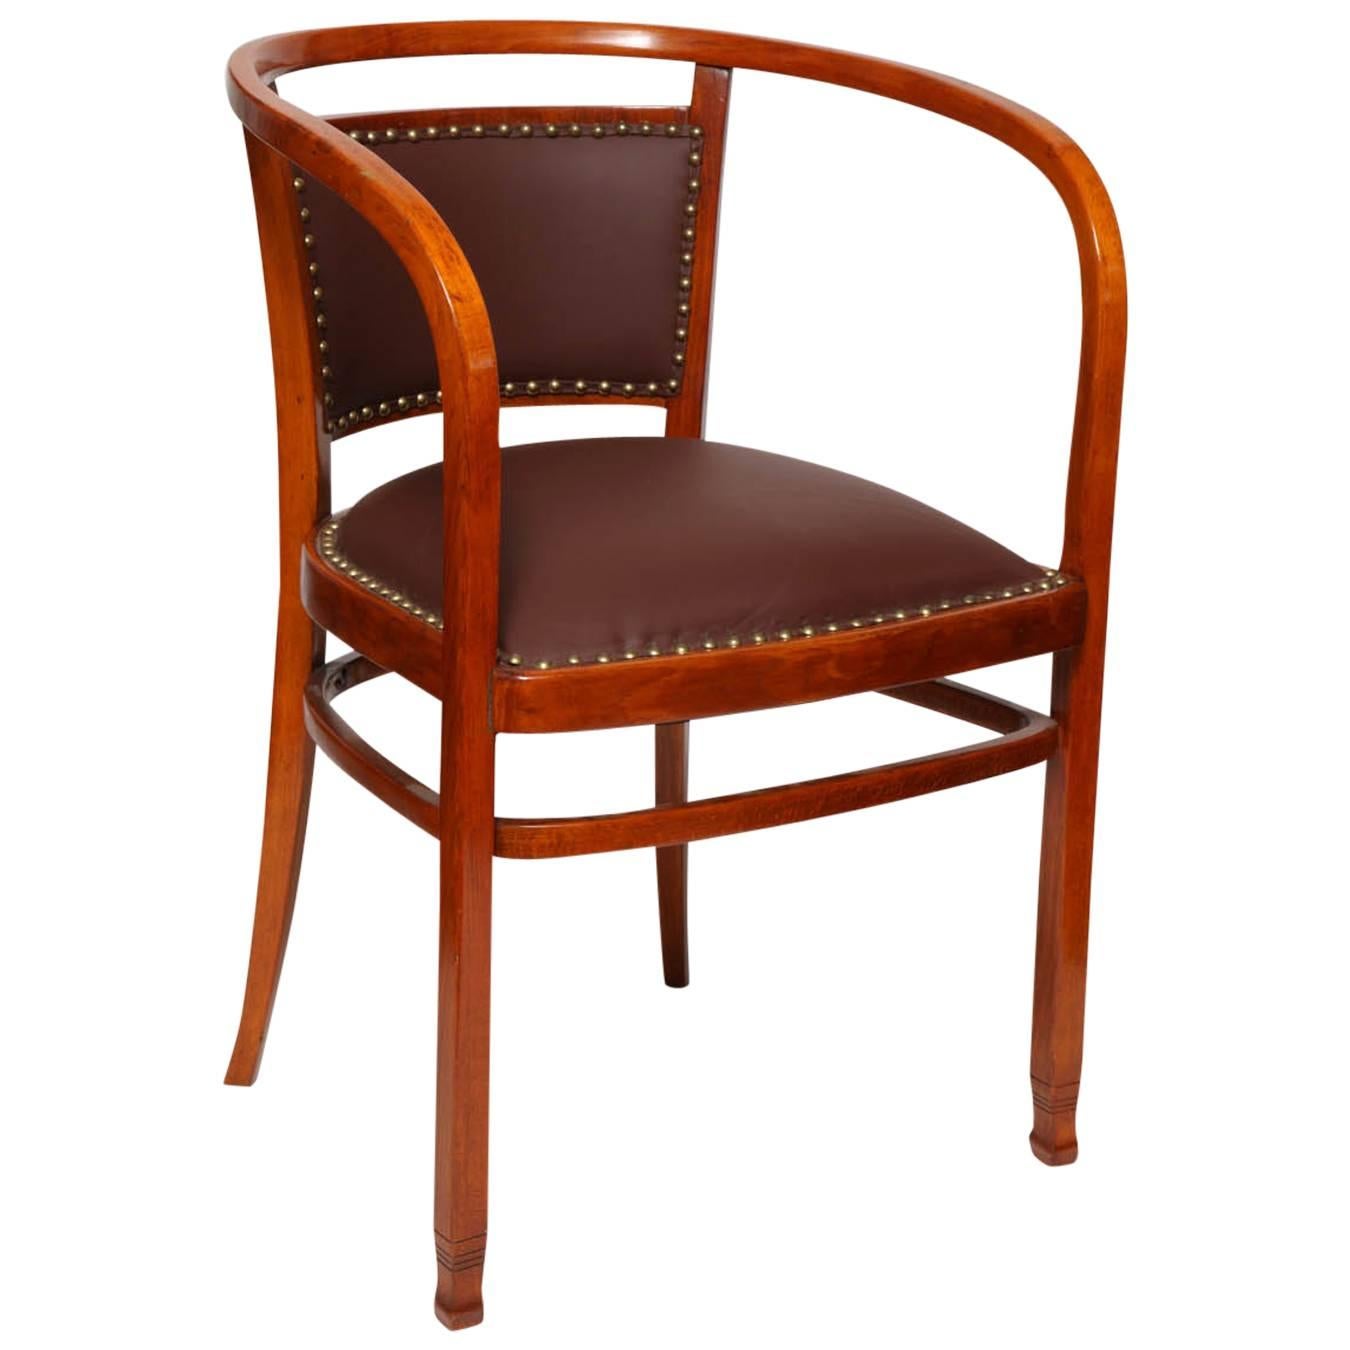 Otto Wagner Secessionist Bentwood and Leather Armchair, J&J Kohn, 1906 For Sale